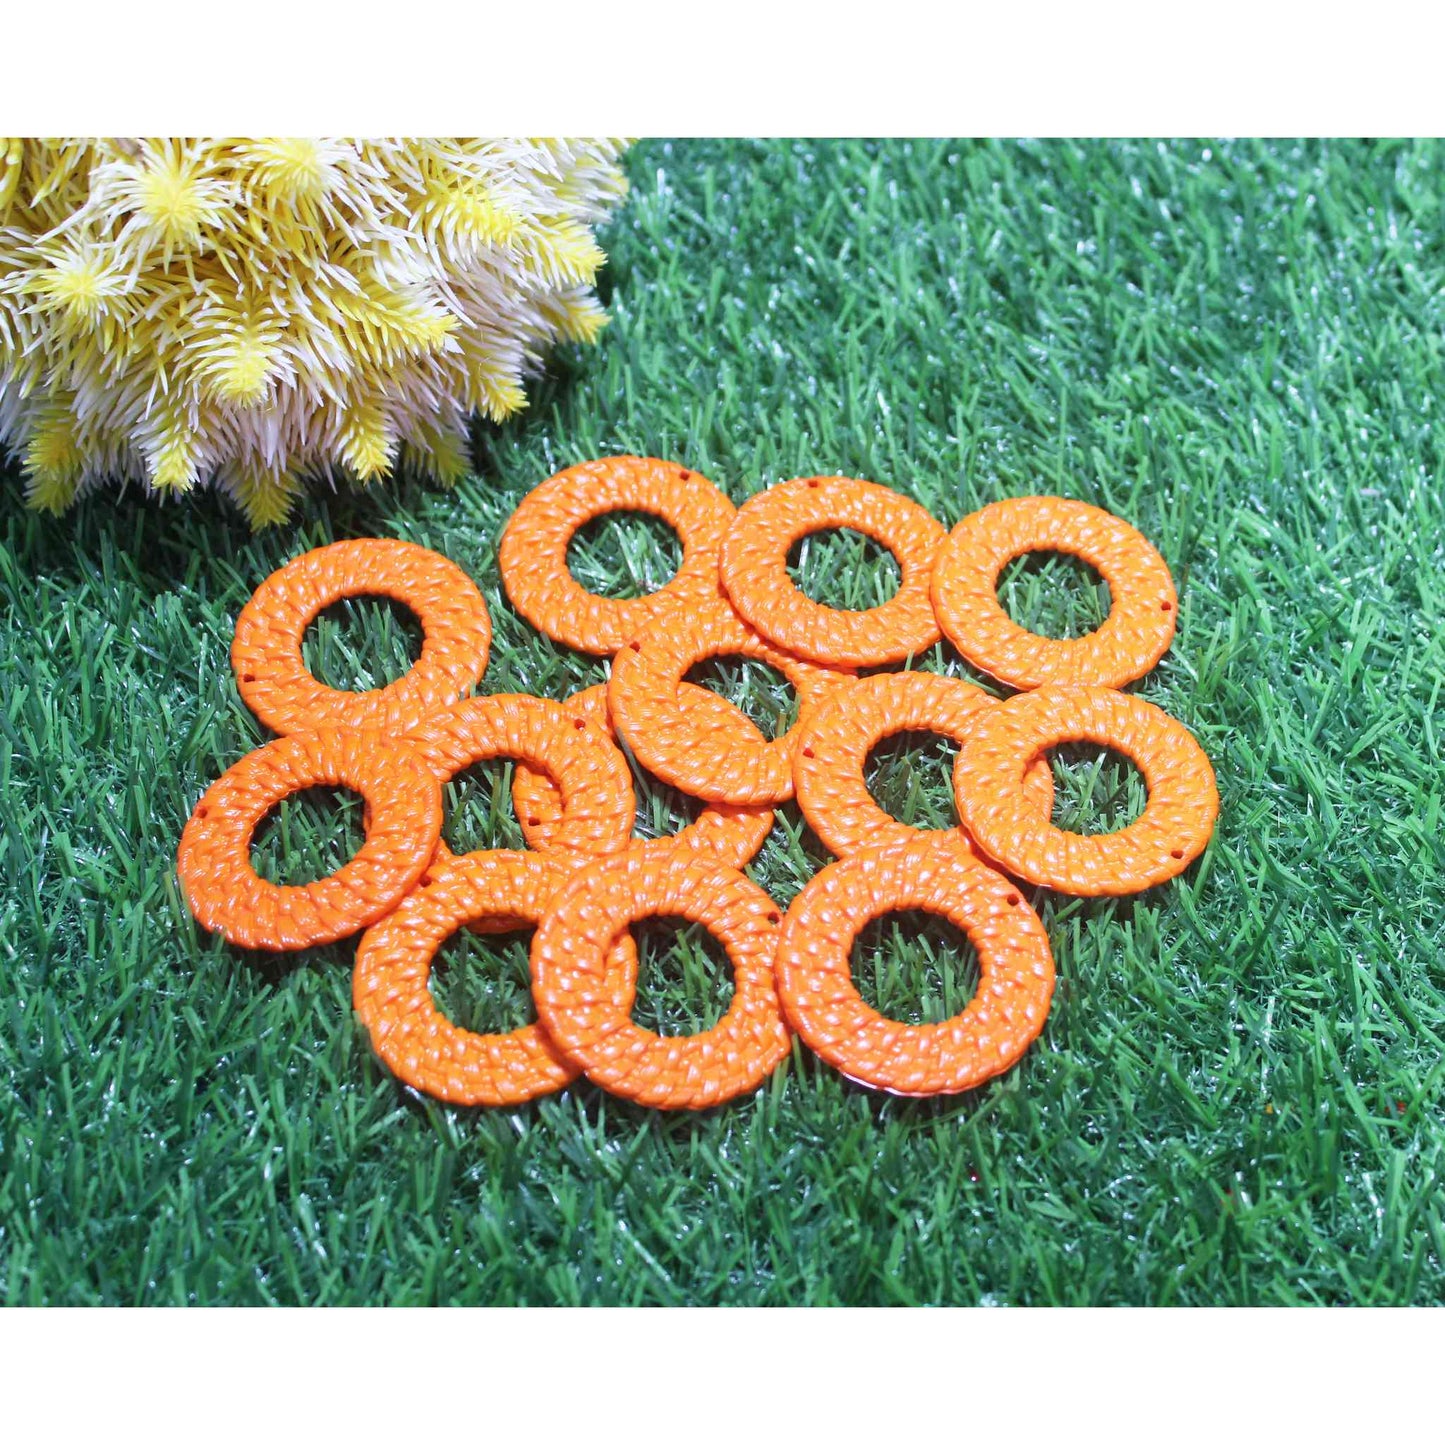 Indian Petals Beautiful Flat Braided Style Base for DIY Craft, Trousseau Packing or Decoration, Round, Orange - Indian Petals